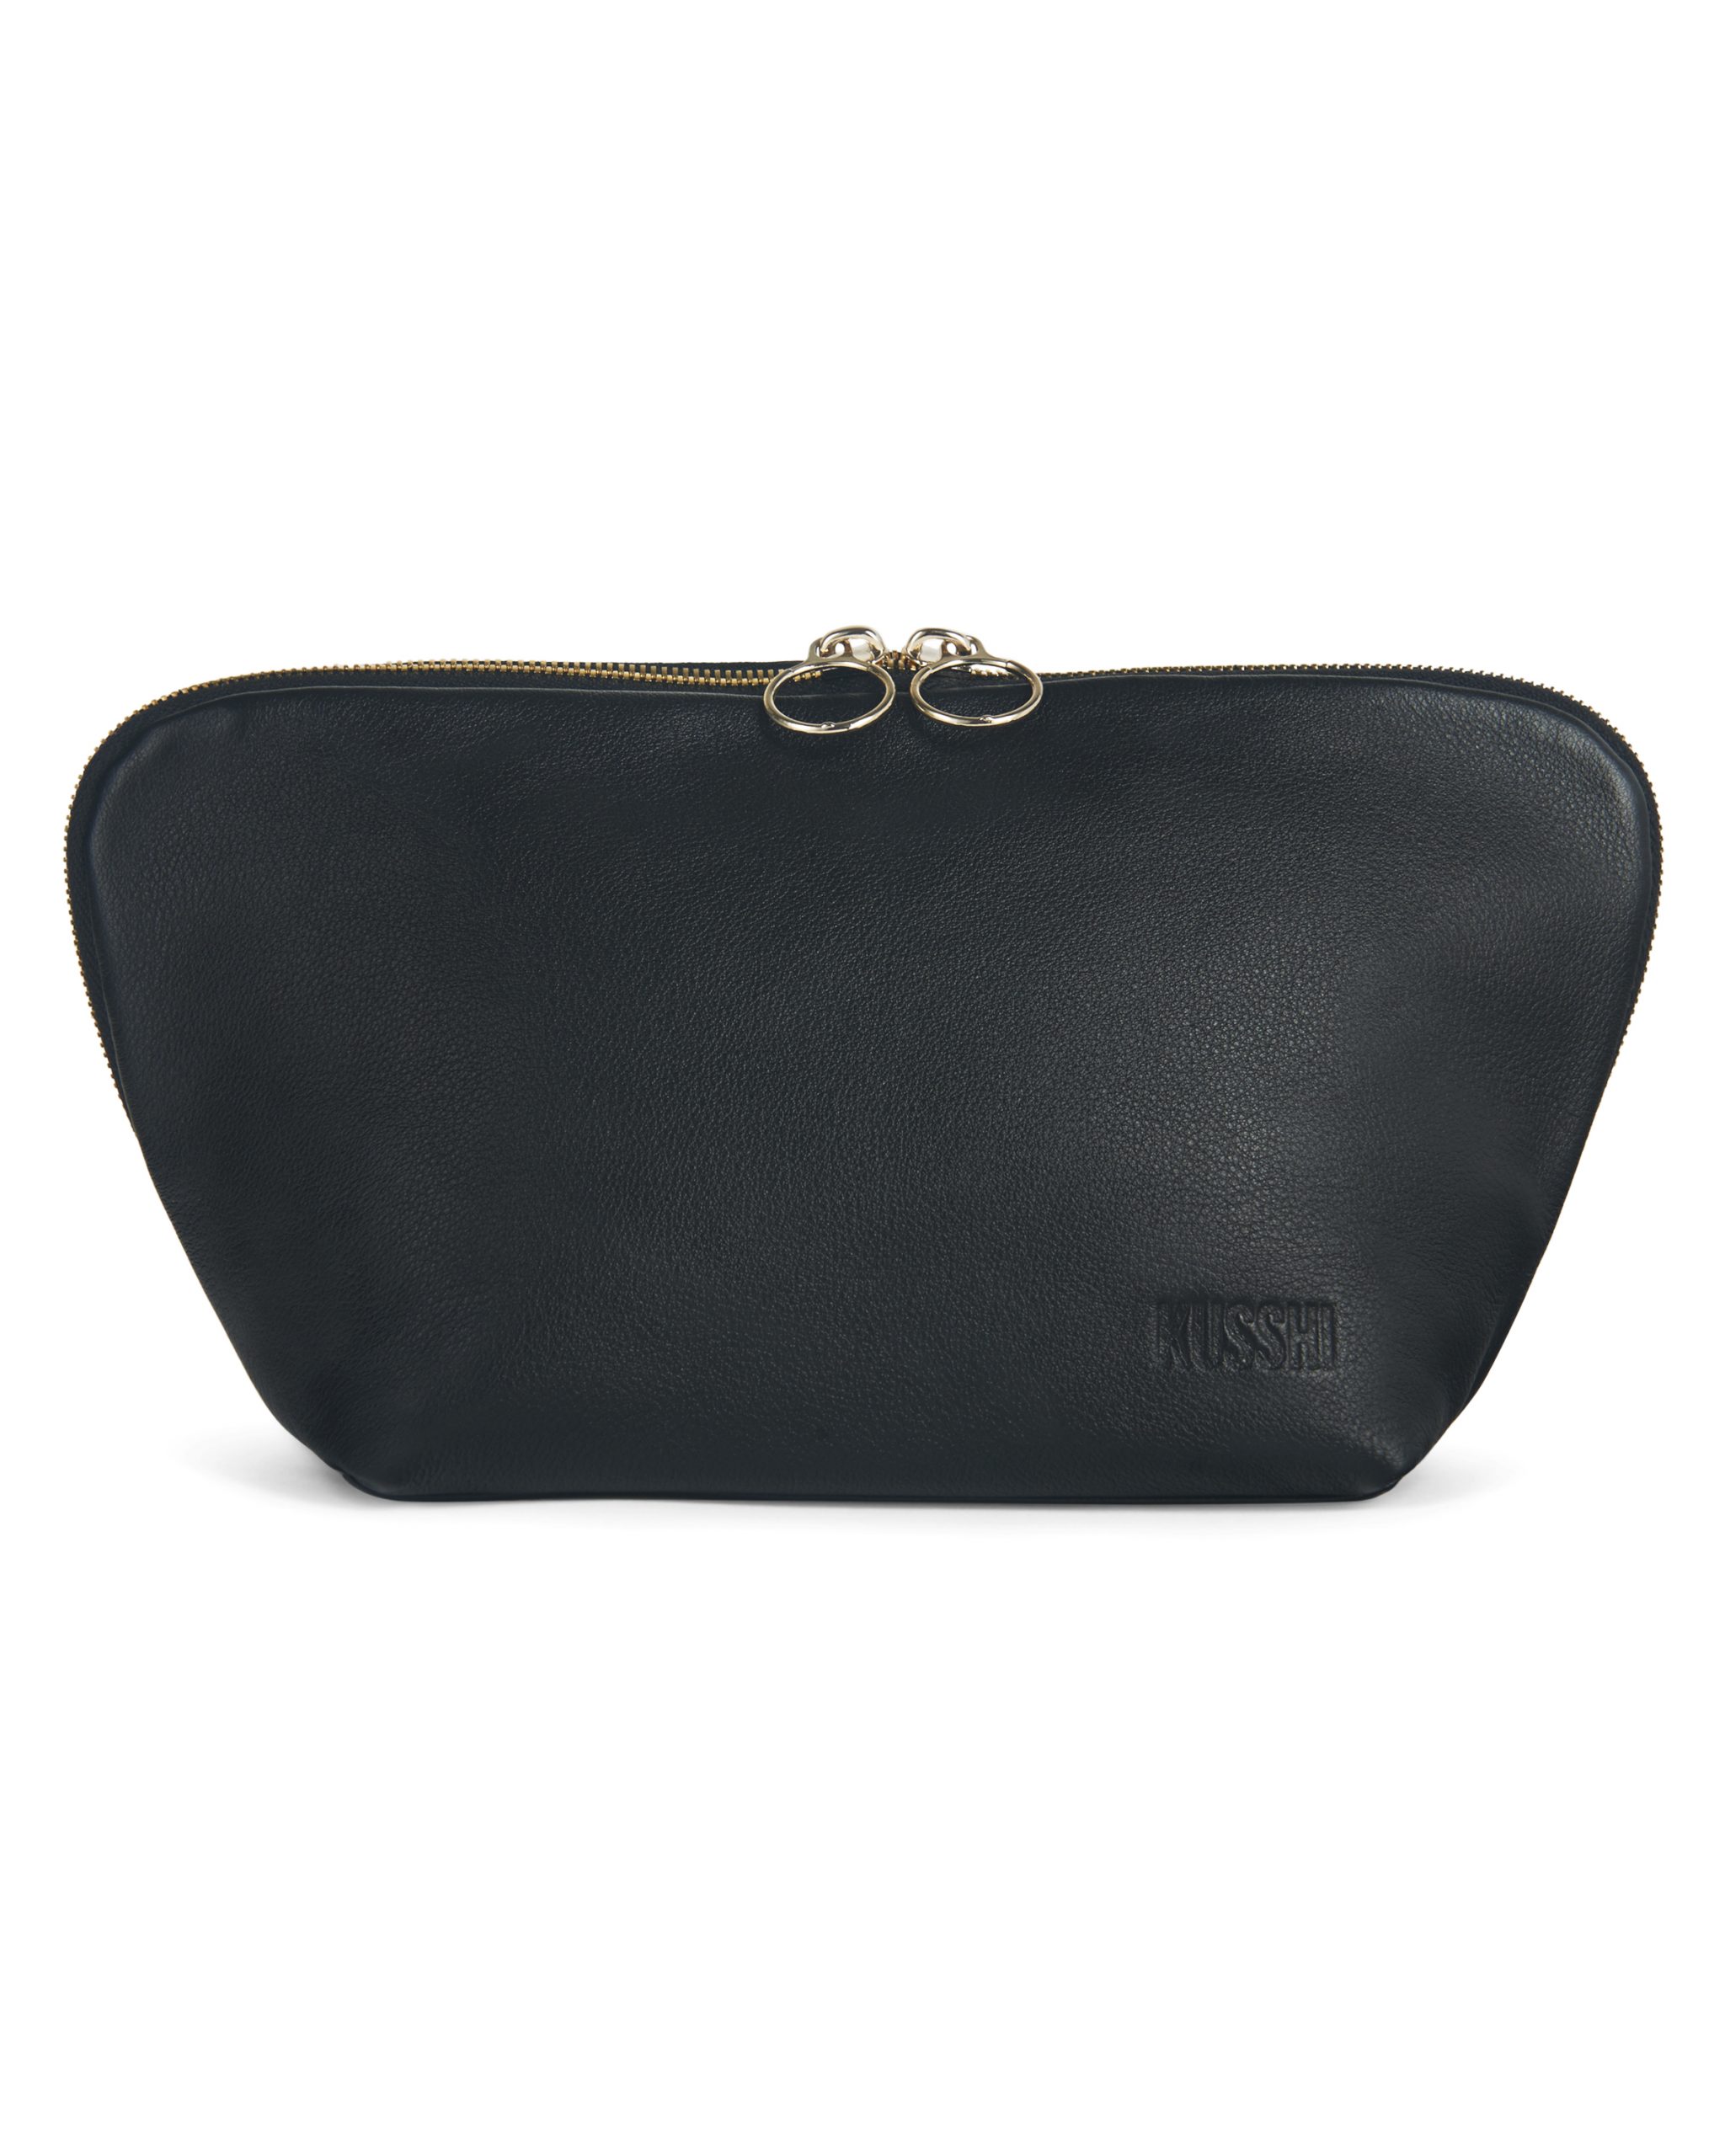 Signature Makeup Bag Luxurious Black Leather with Pink Interior - Holtz Spa